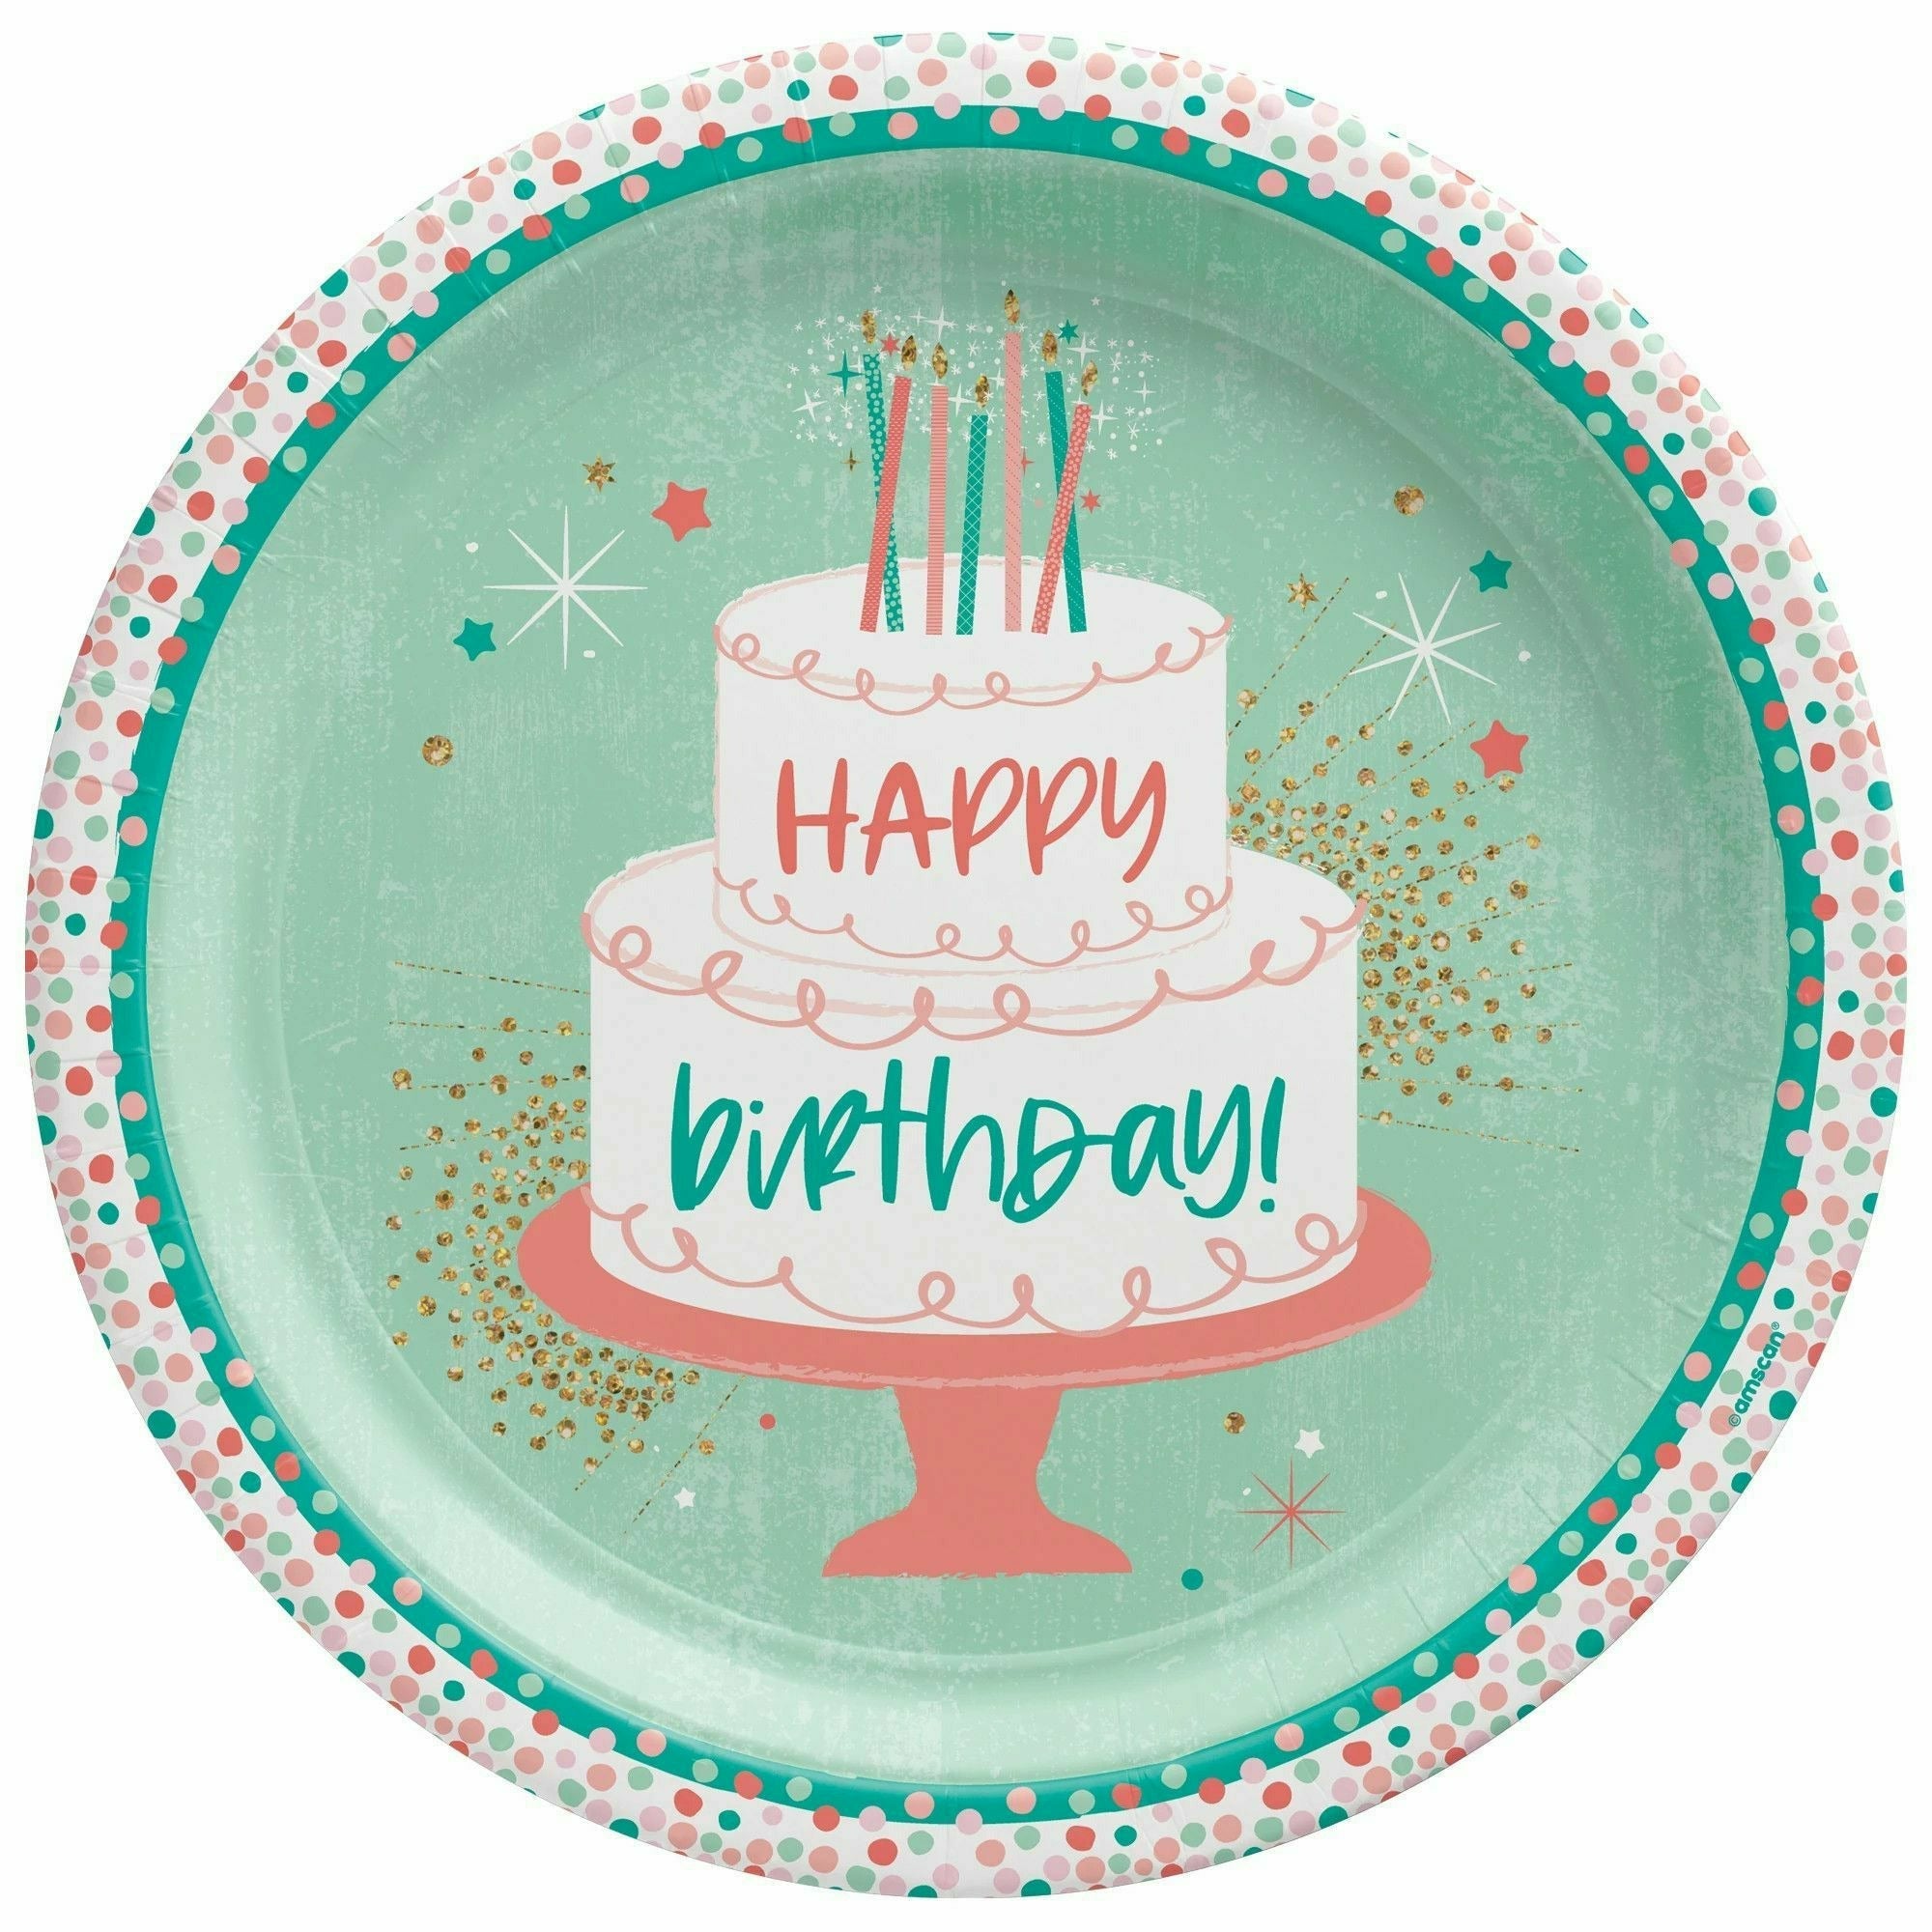 Amscan BIRTHDAY Happy Cake Day 10 1/2" Plate